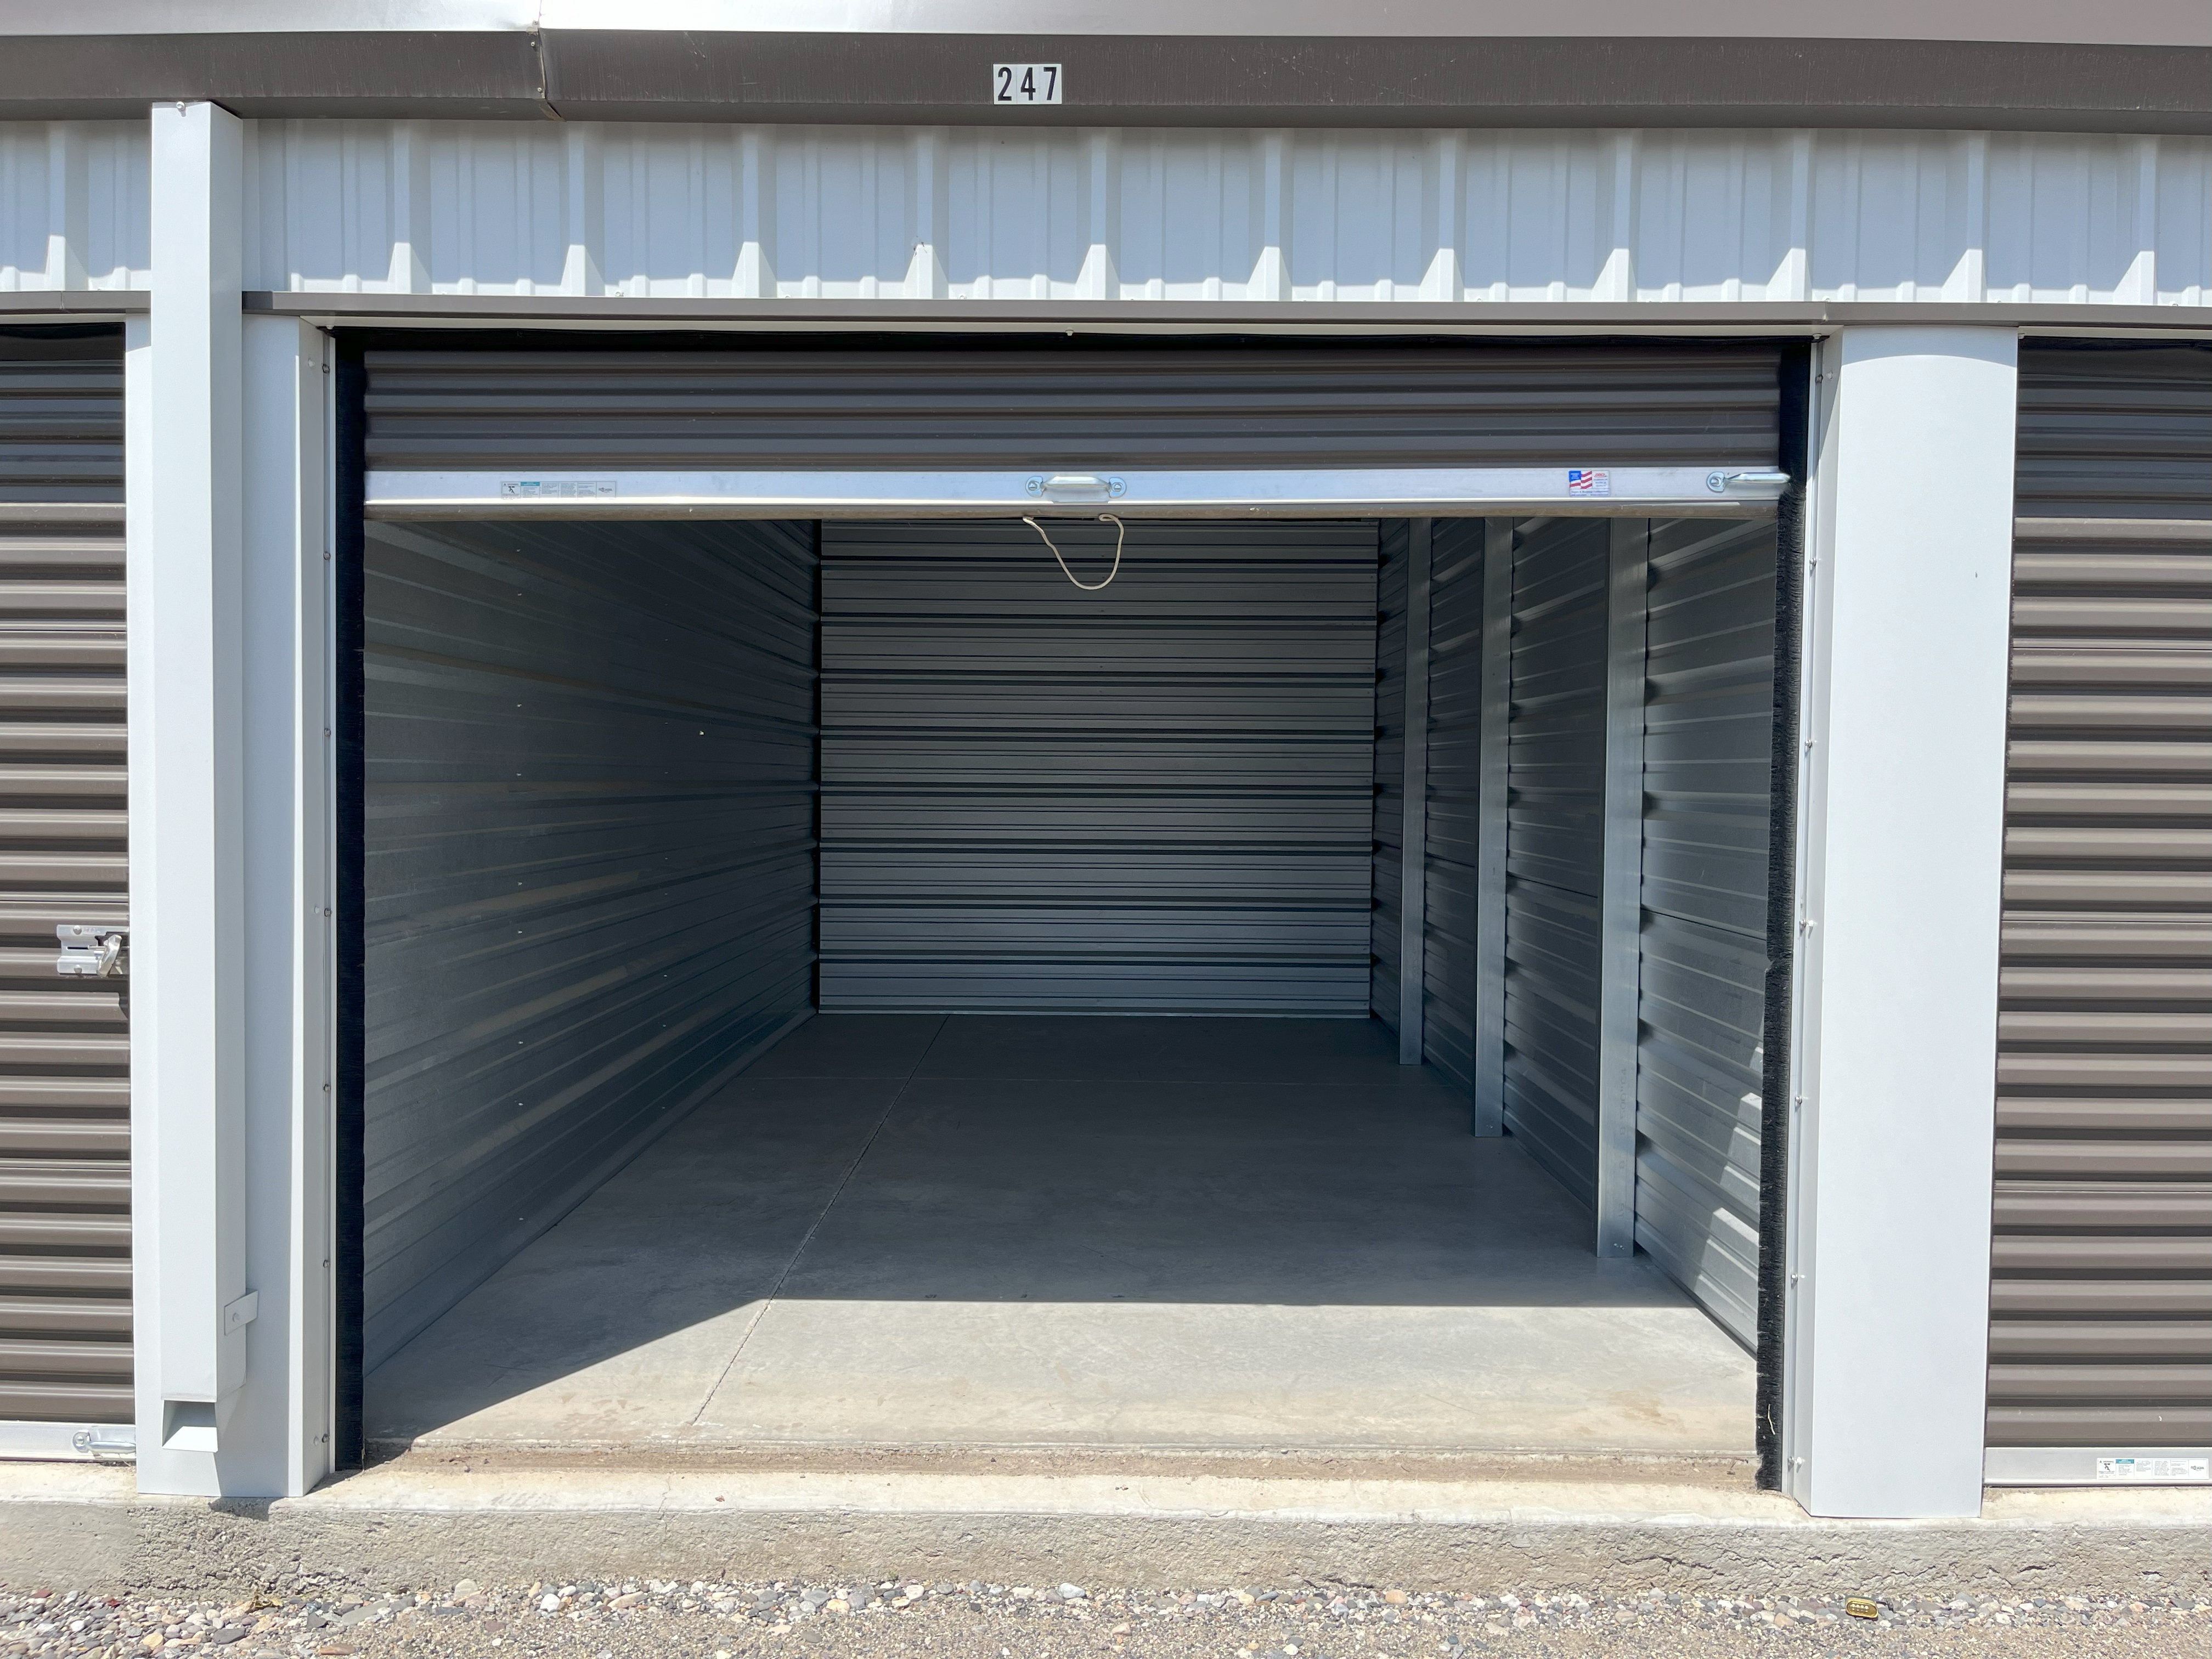 yellowstone airport storage 10x20 indoor storage unit for cars, other belongings